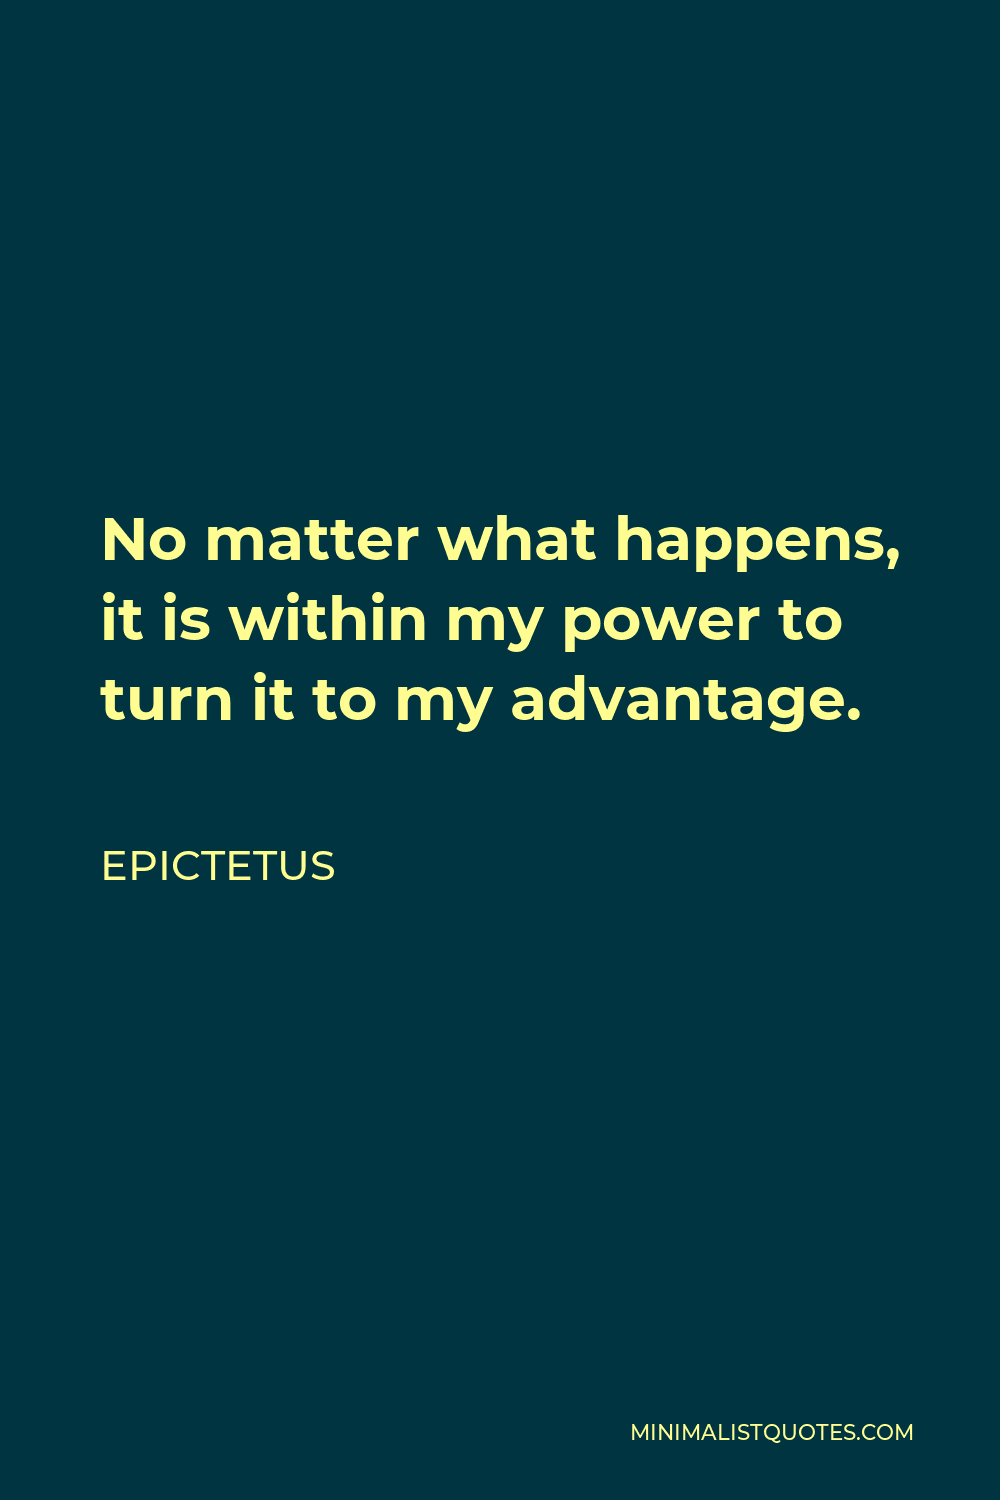 Epictetus Quote - No matter what happens, it is within my power to turn it to my advantage.